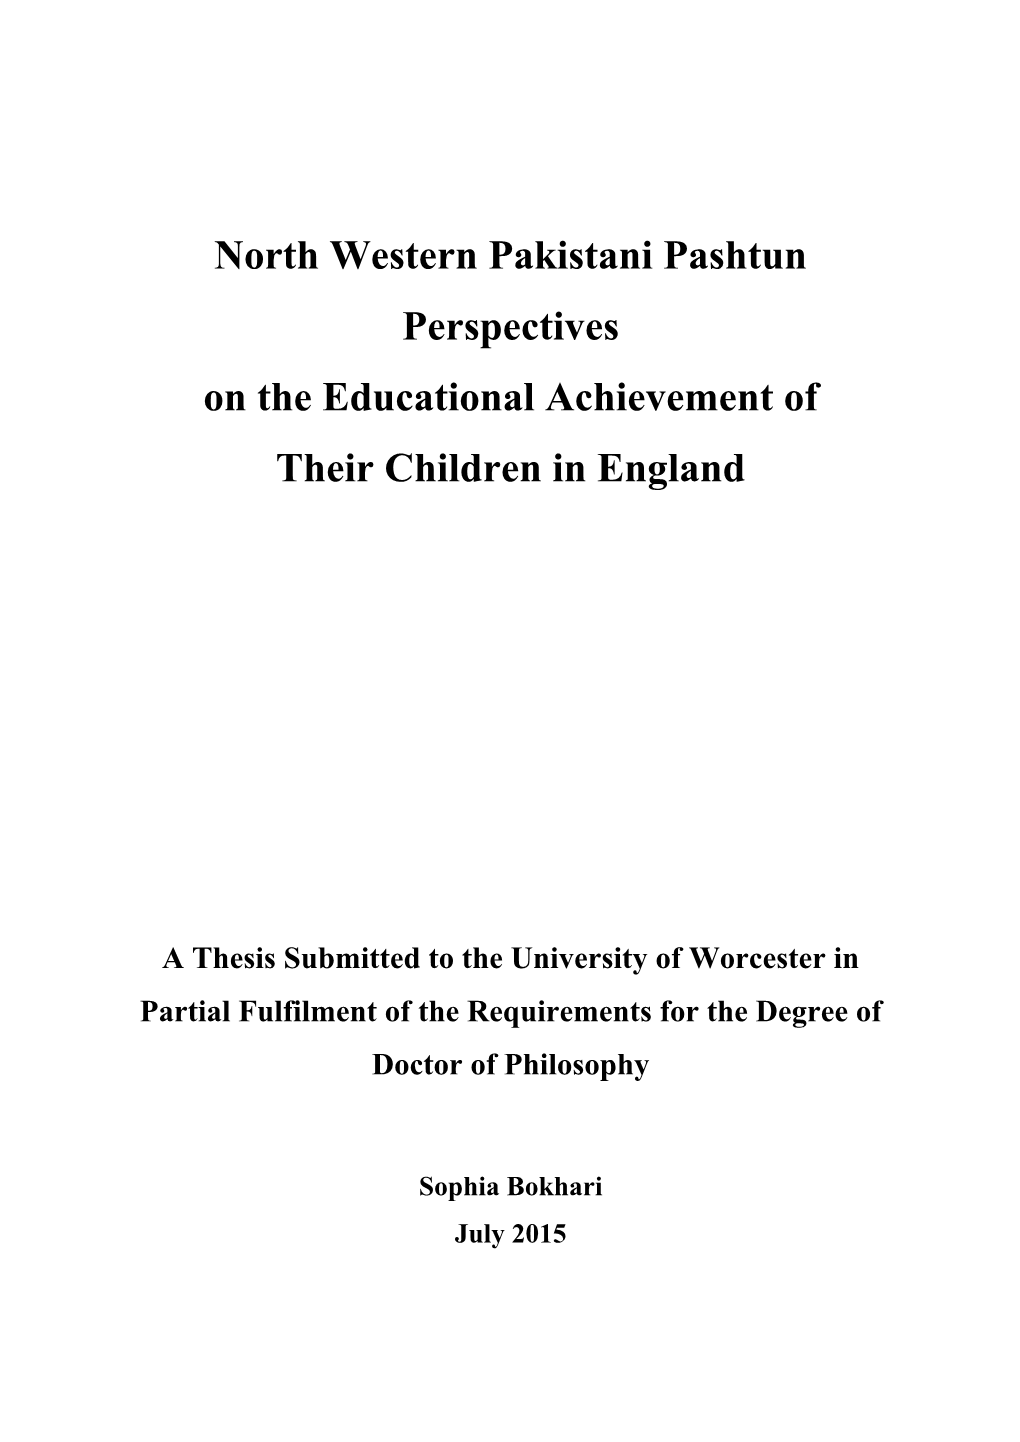 North Western Pakistani Pashtun Perspectives on the Educational Achievement of Their Children in England